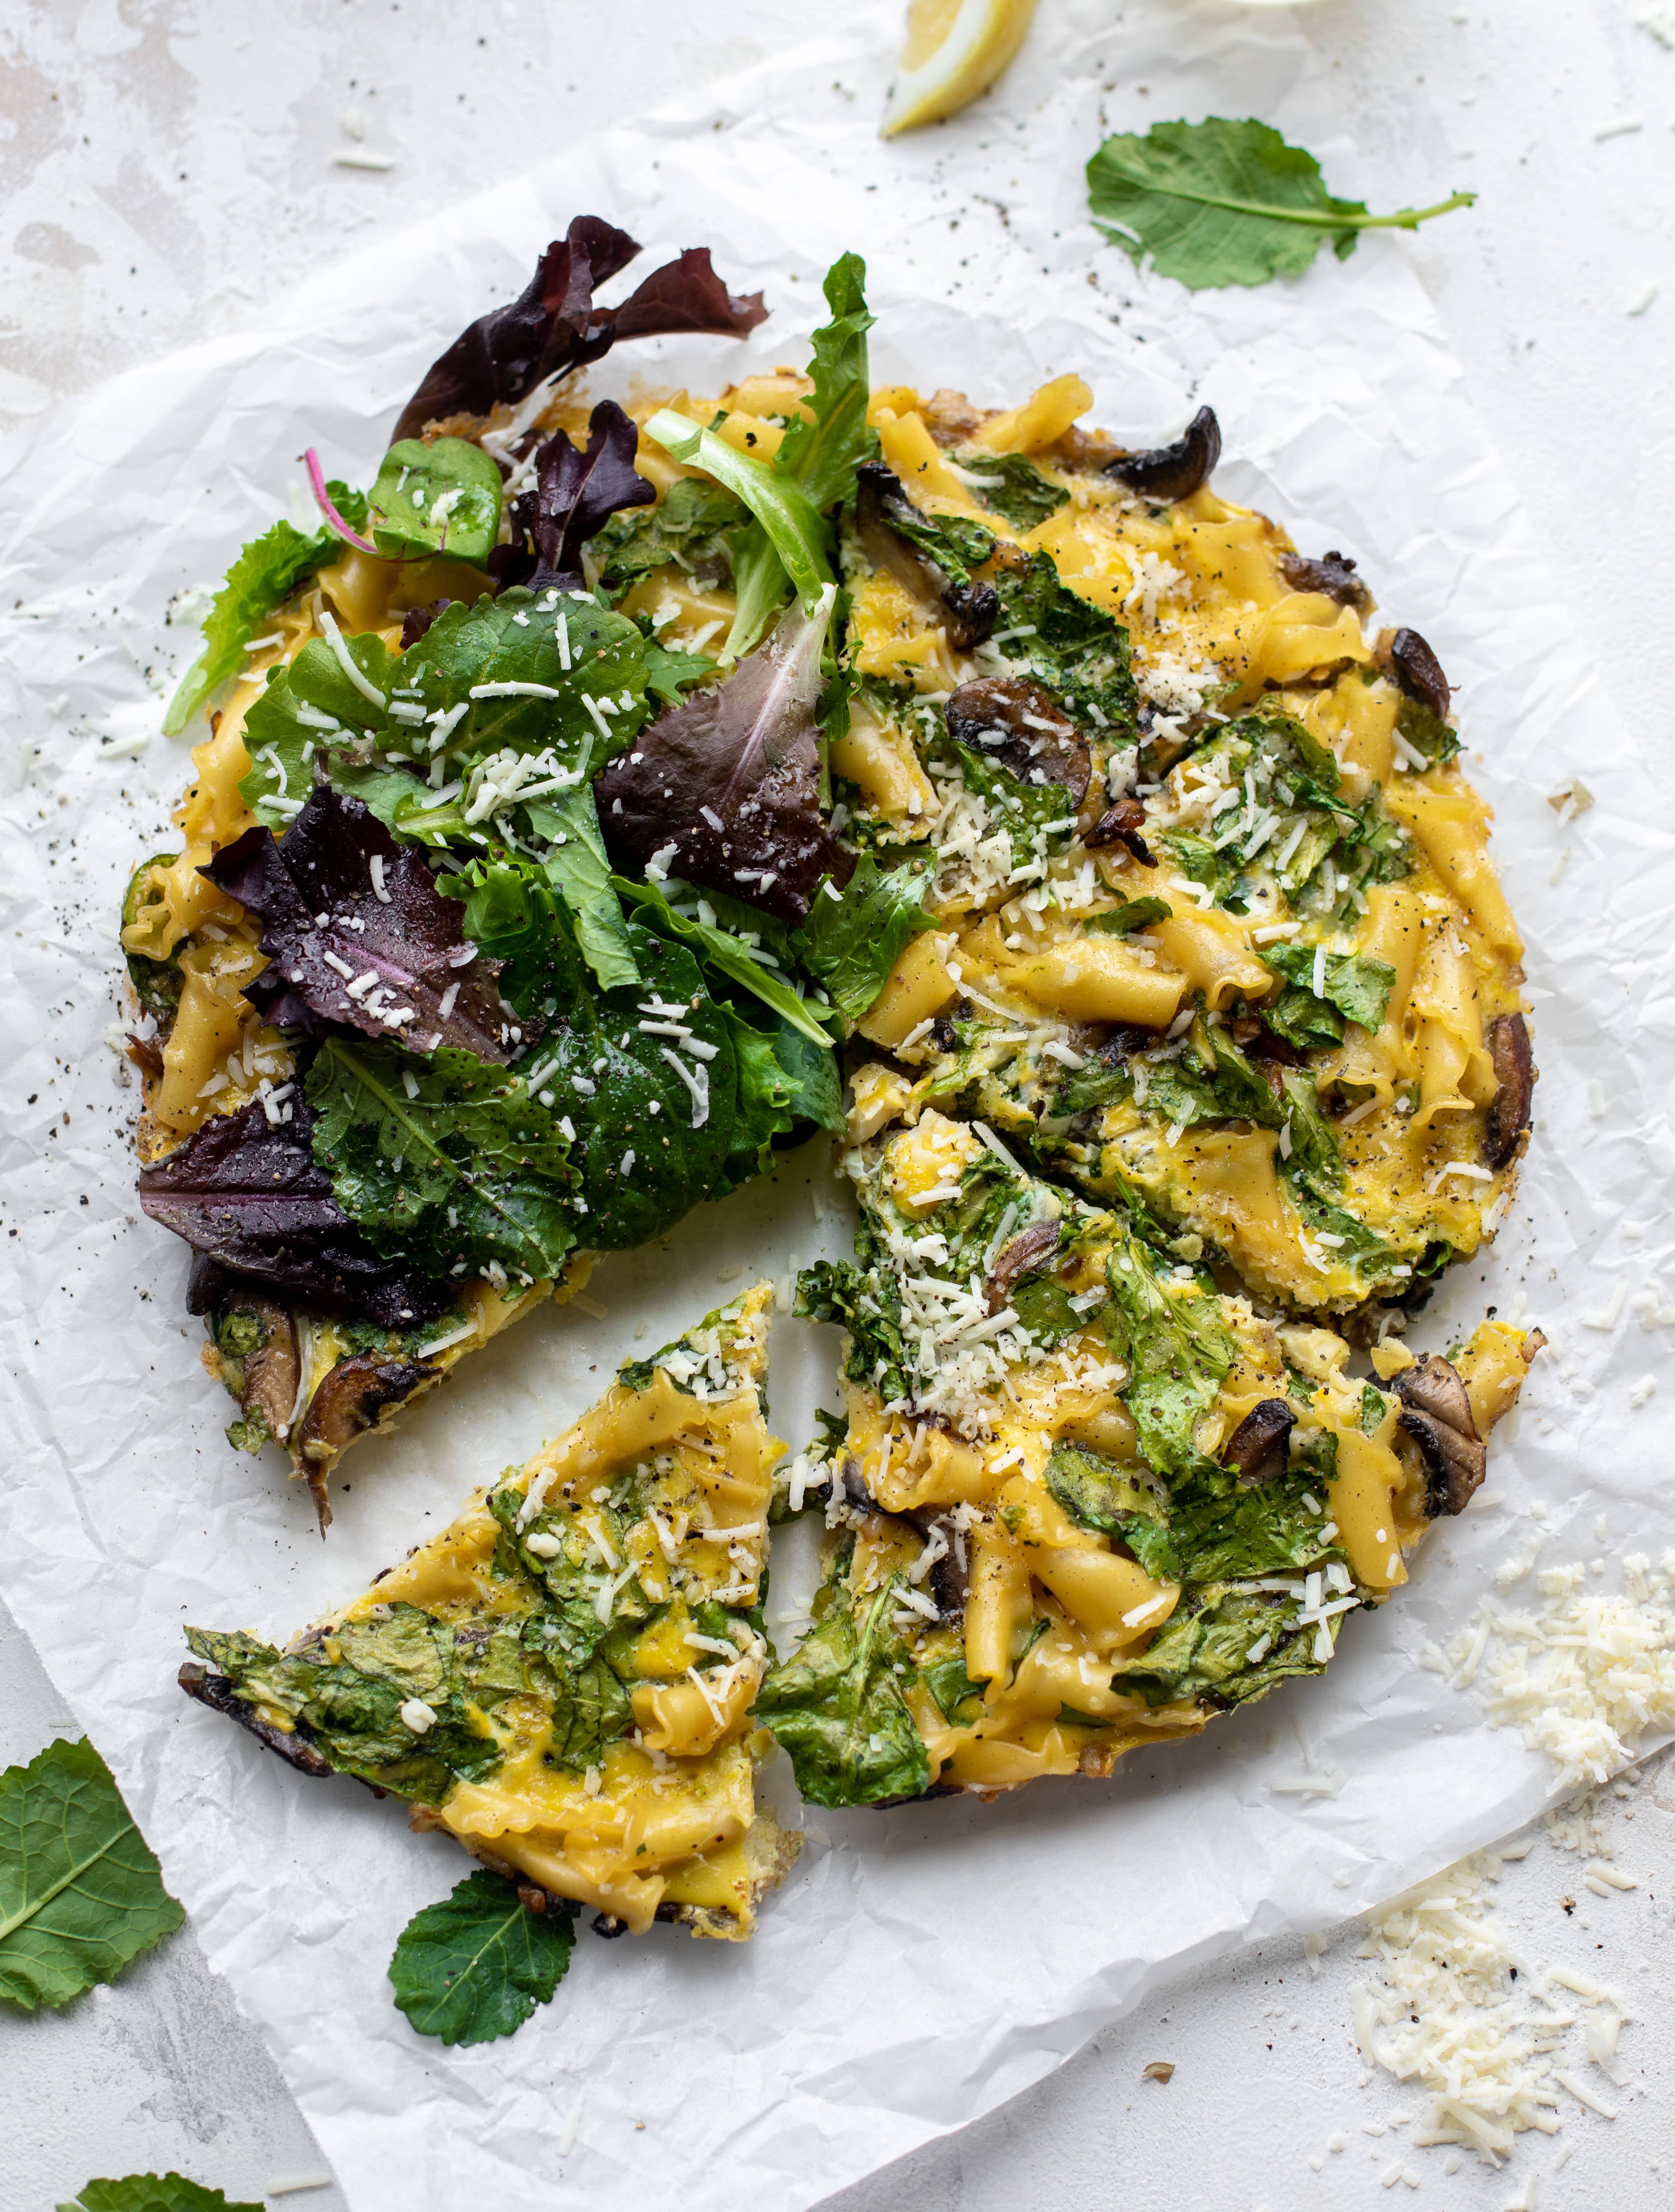 This super easy pasta frittata uses leftover ingredients and can be prepped ahead of time. Leftovers are great and it's satisfying and delicious!